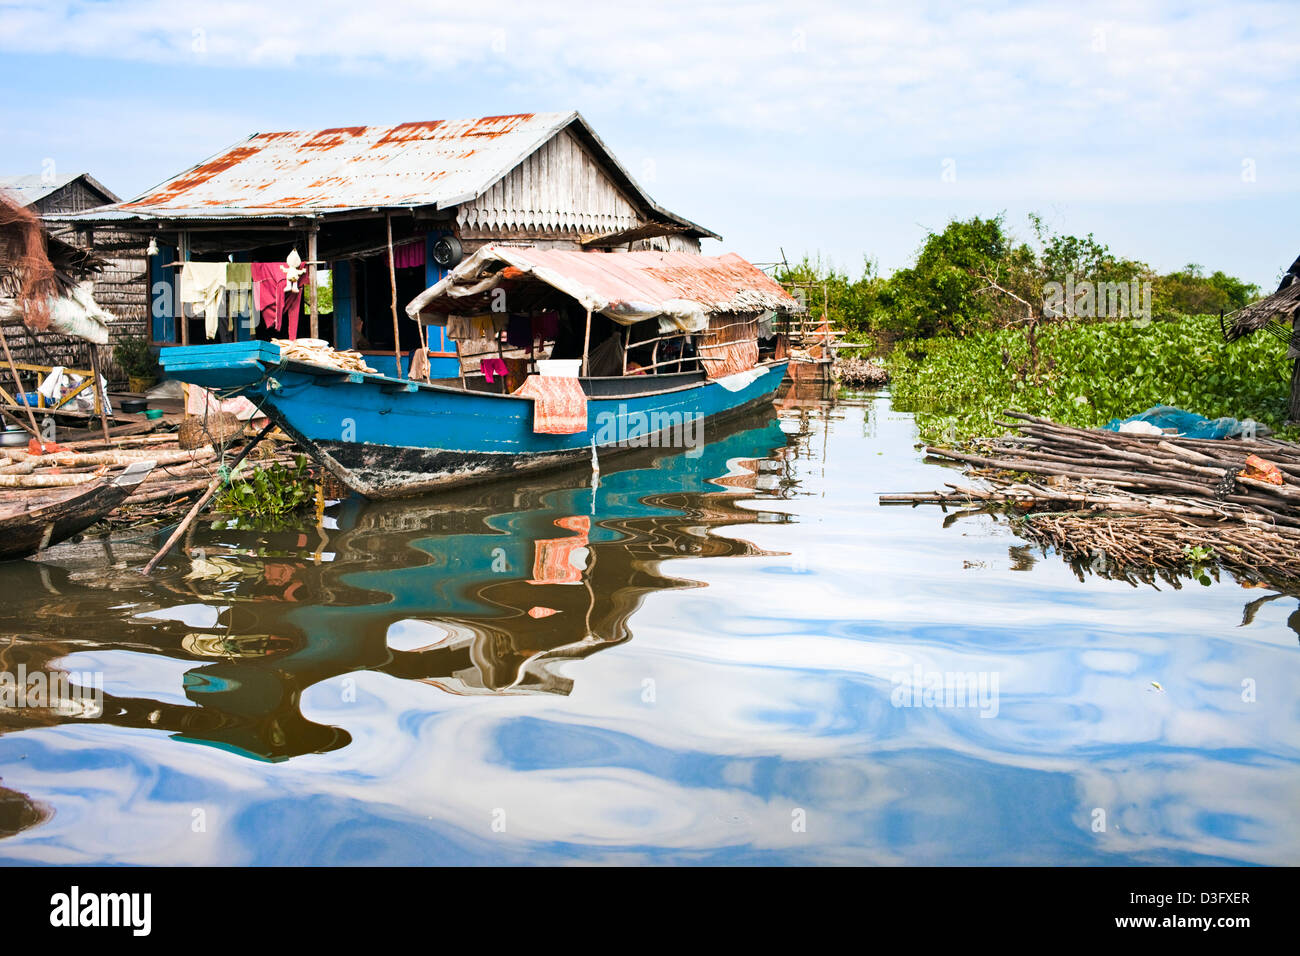 Typical houses in the floating village of Siem Reap, Cambodia Stock Photo